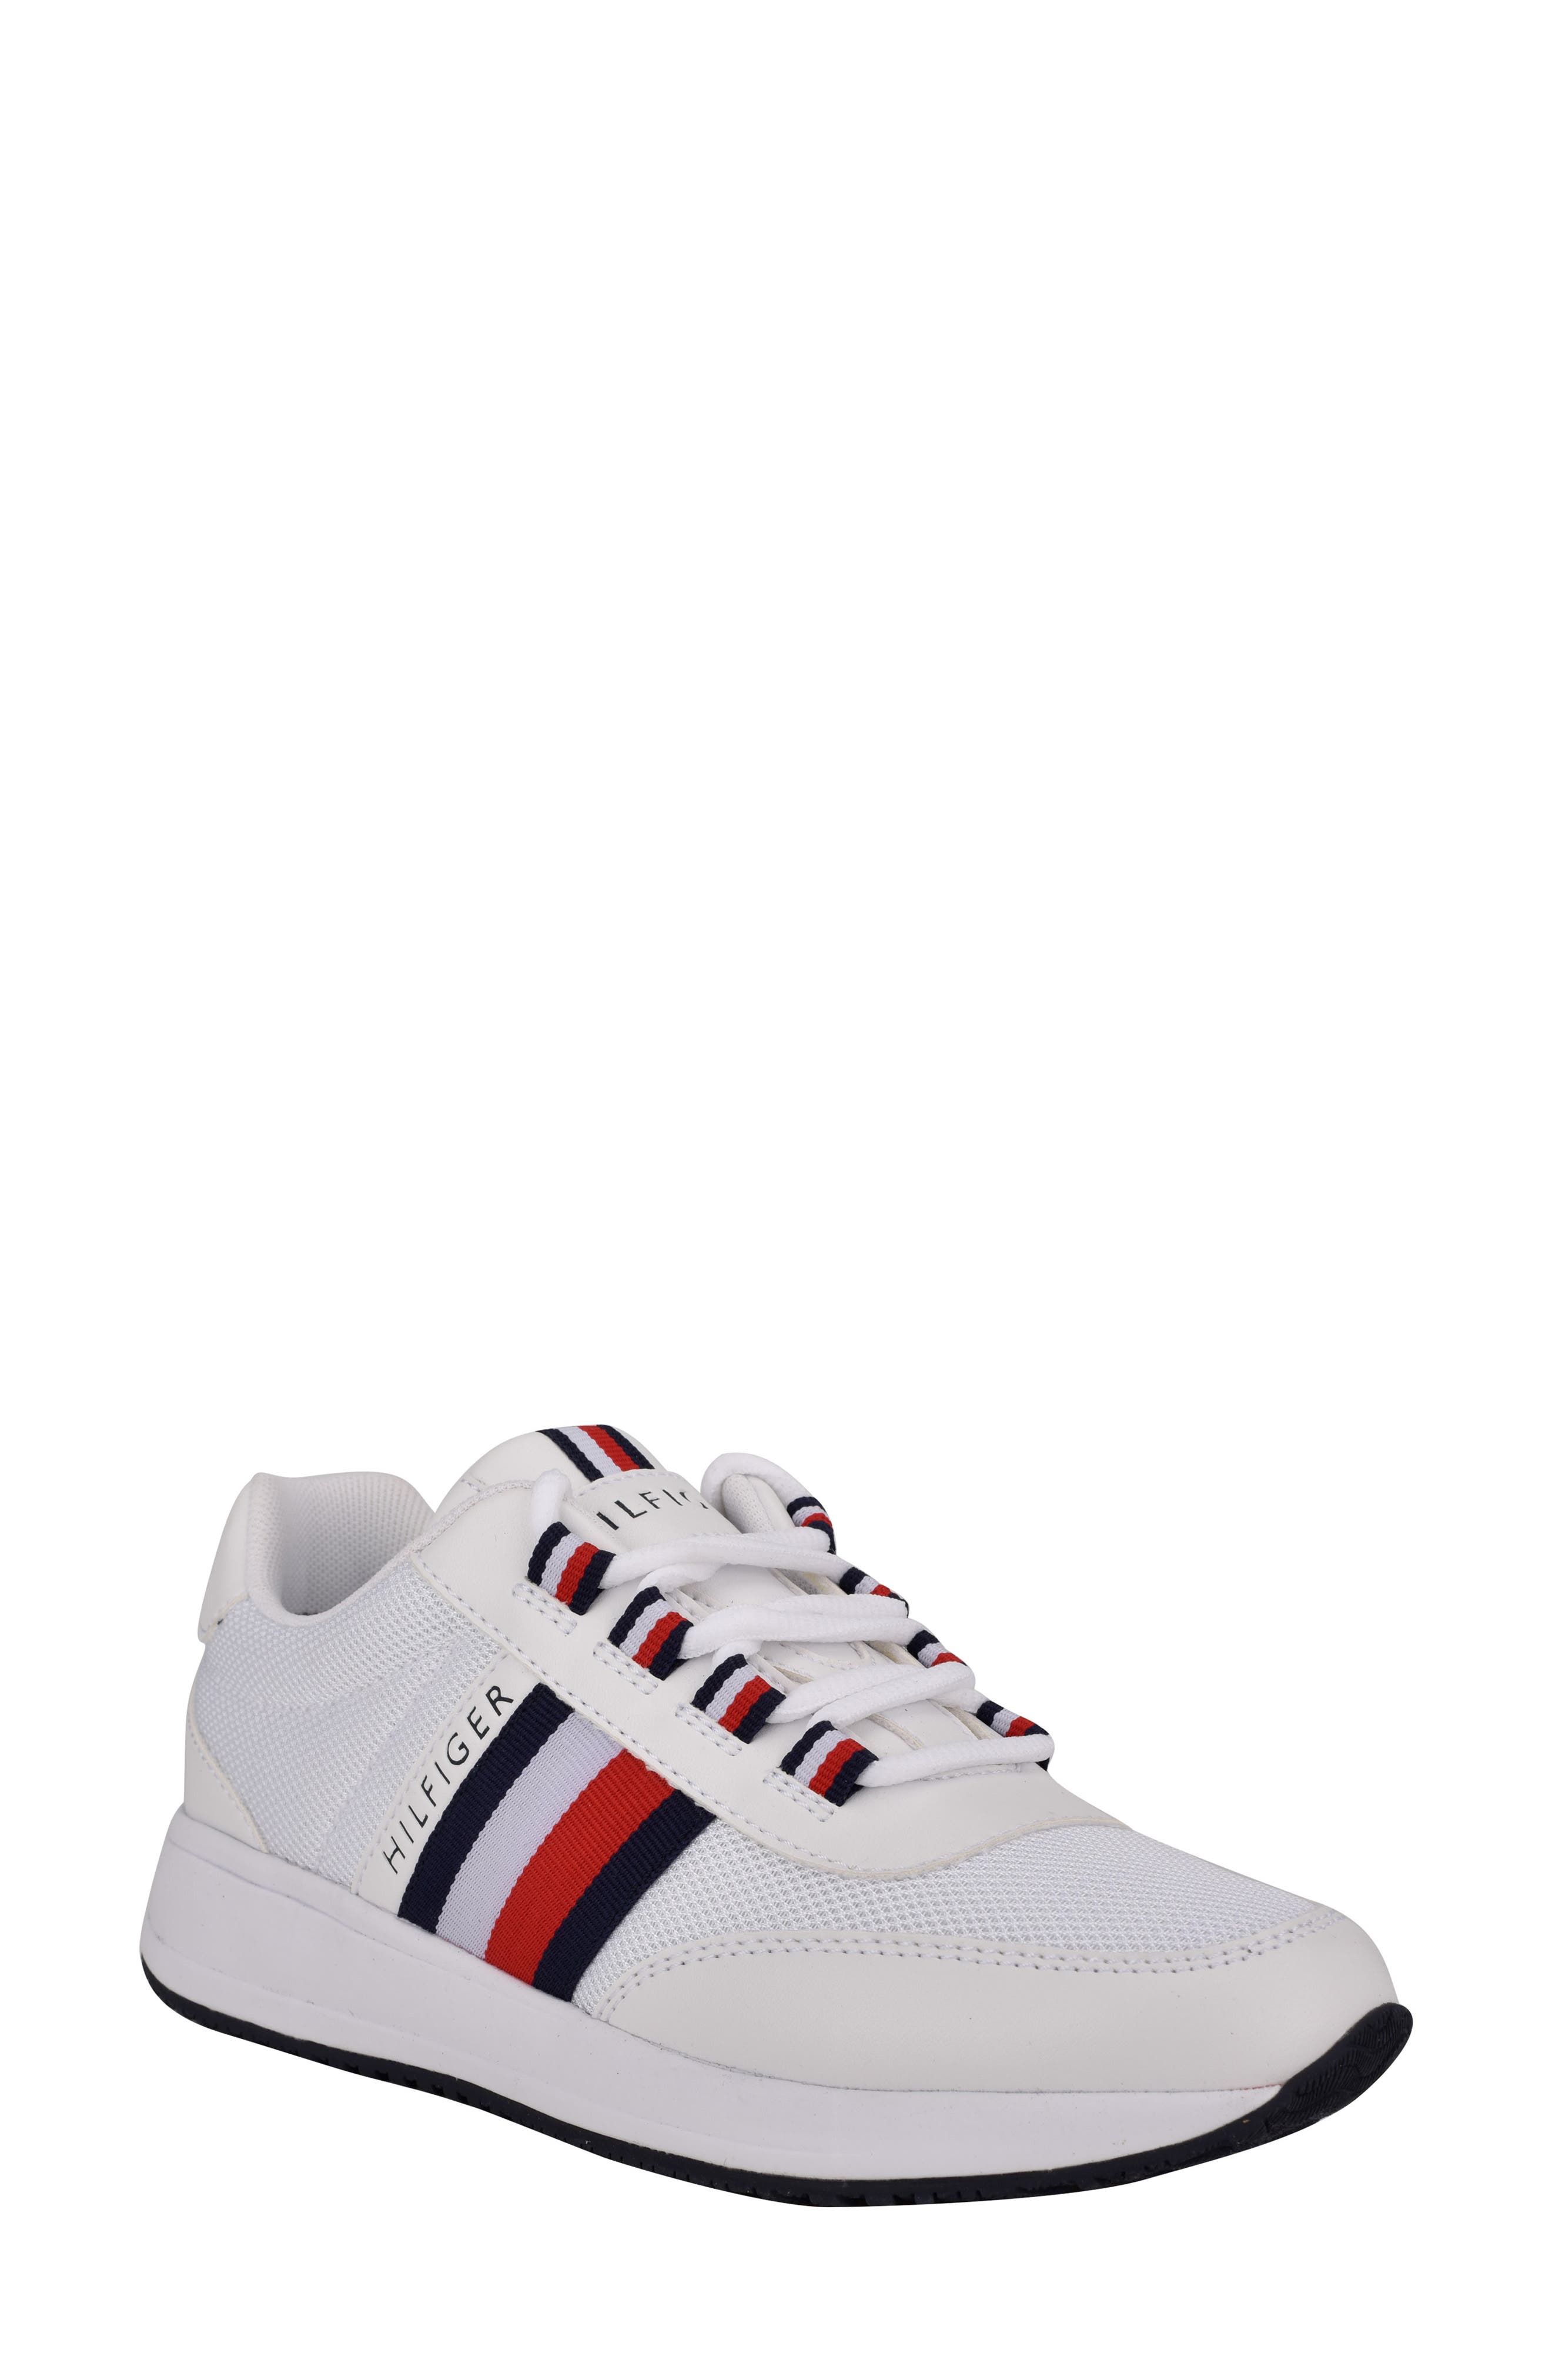 tommy hilfiger tennis shoes